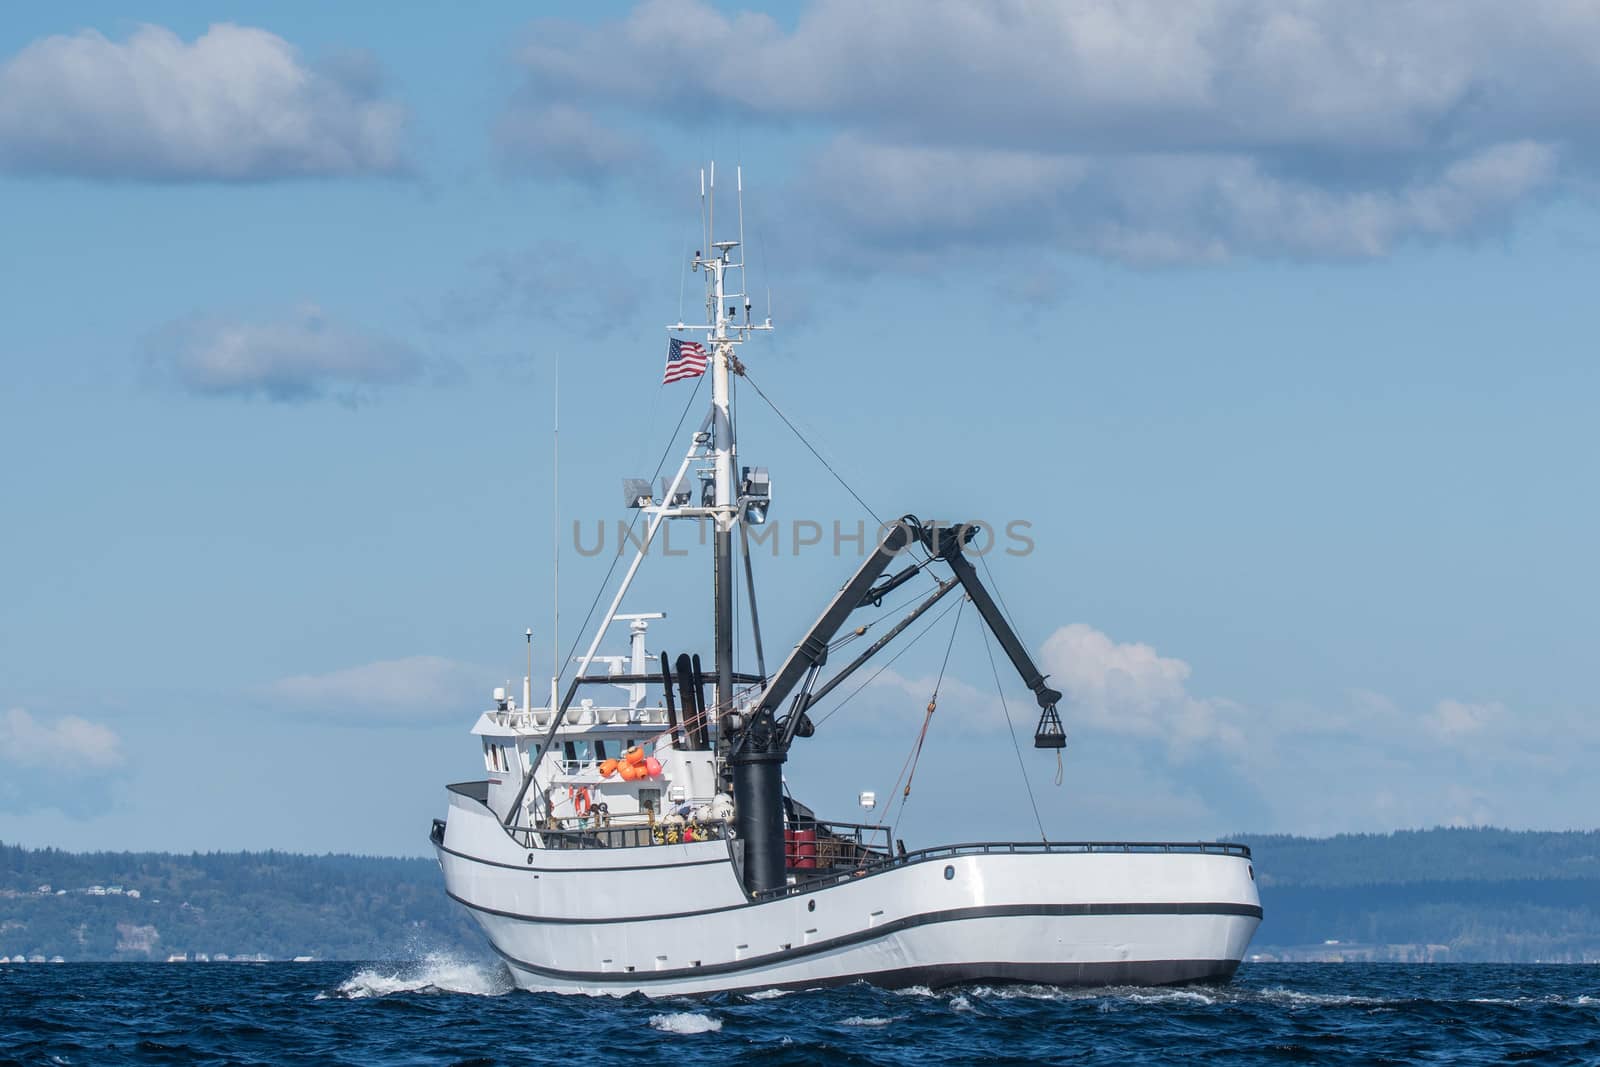 Crab fishing vessel Paragon underway under lightly cloudy skies and calm seas in Puget Sound.